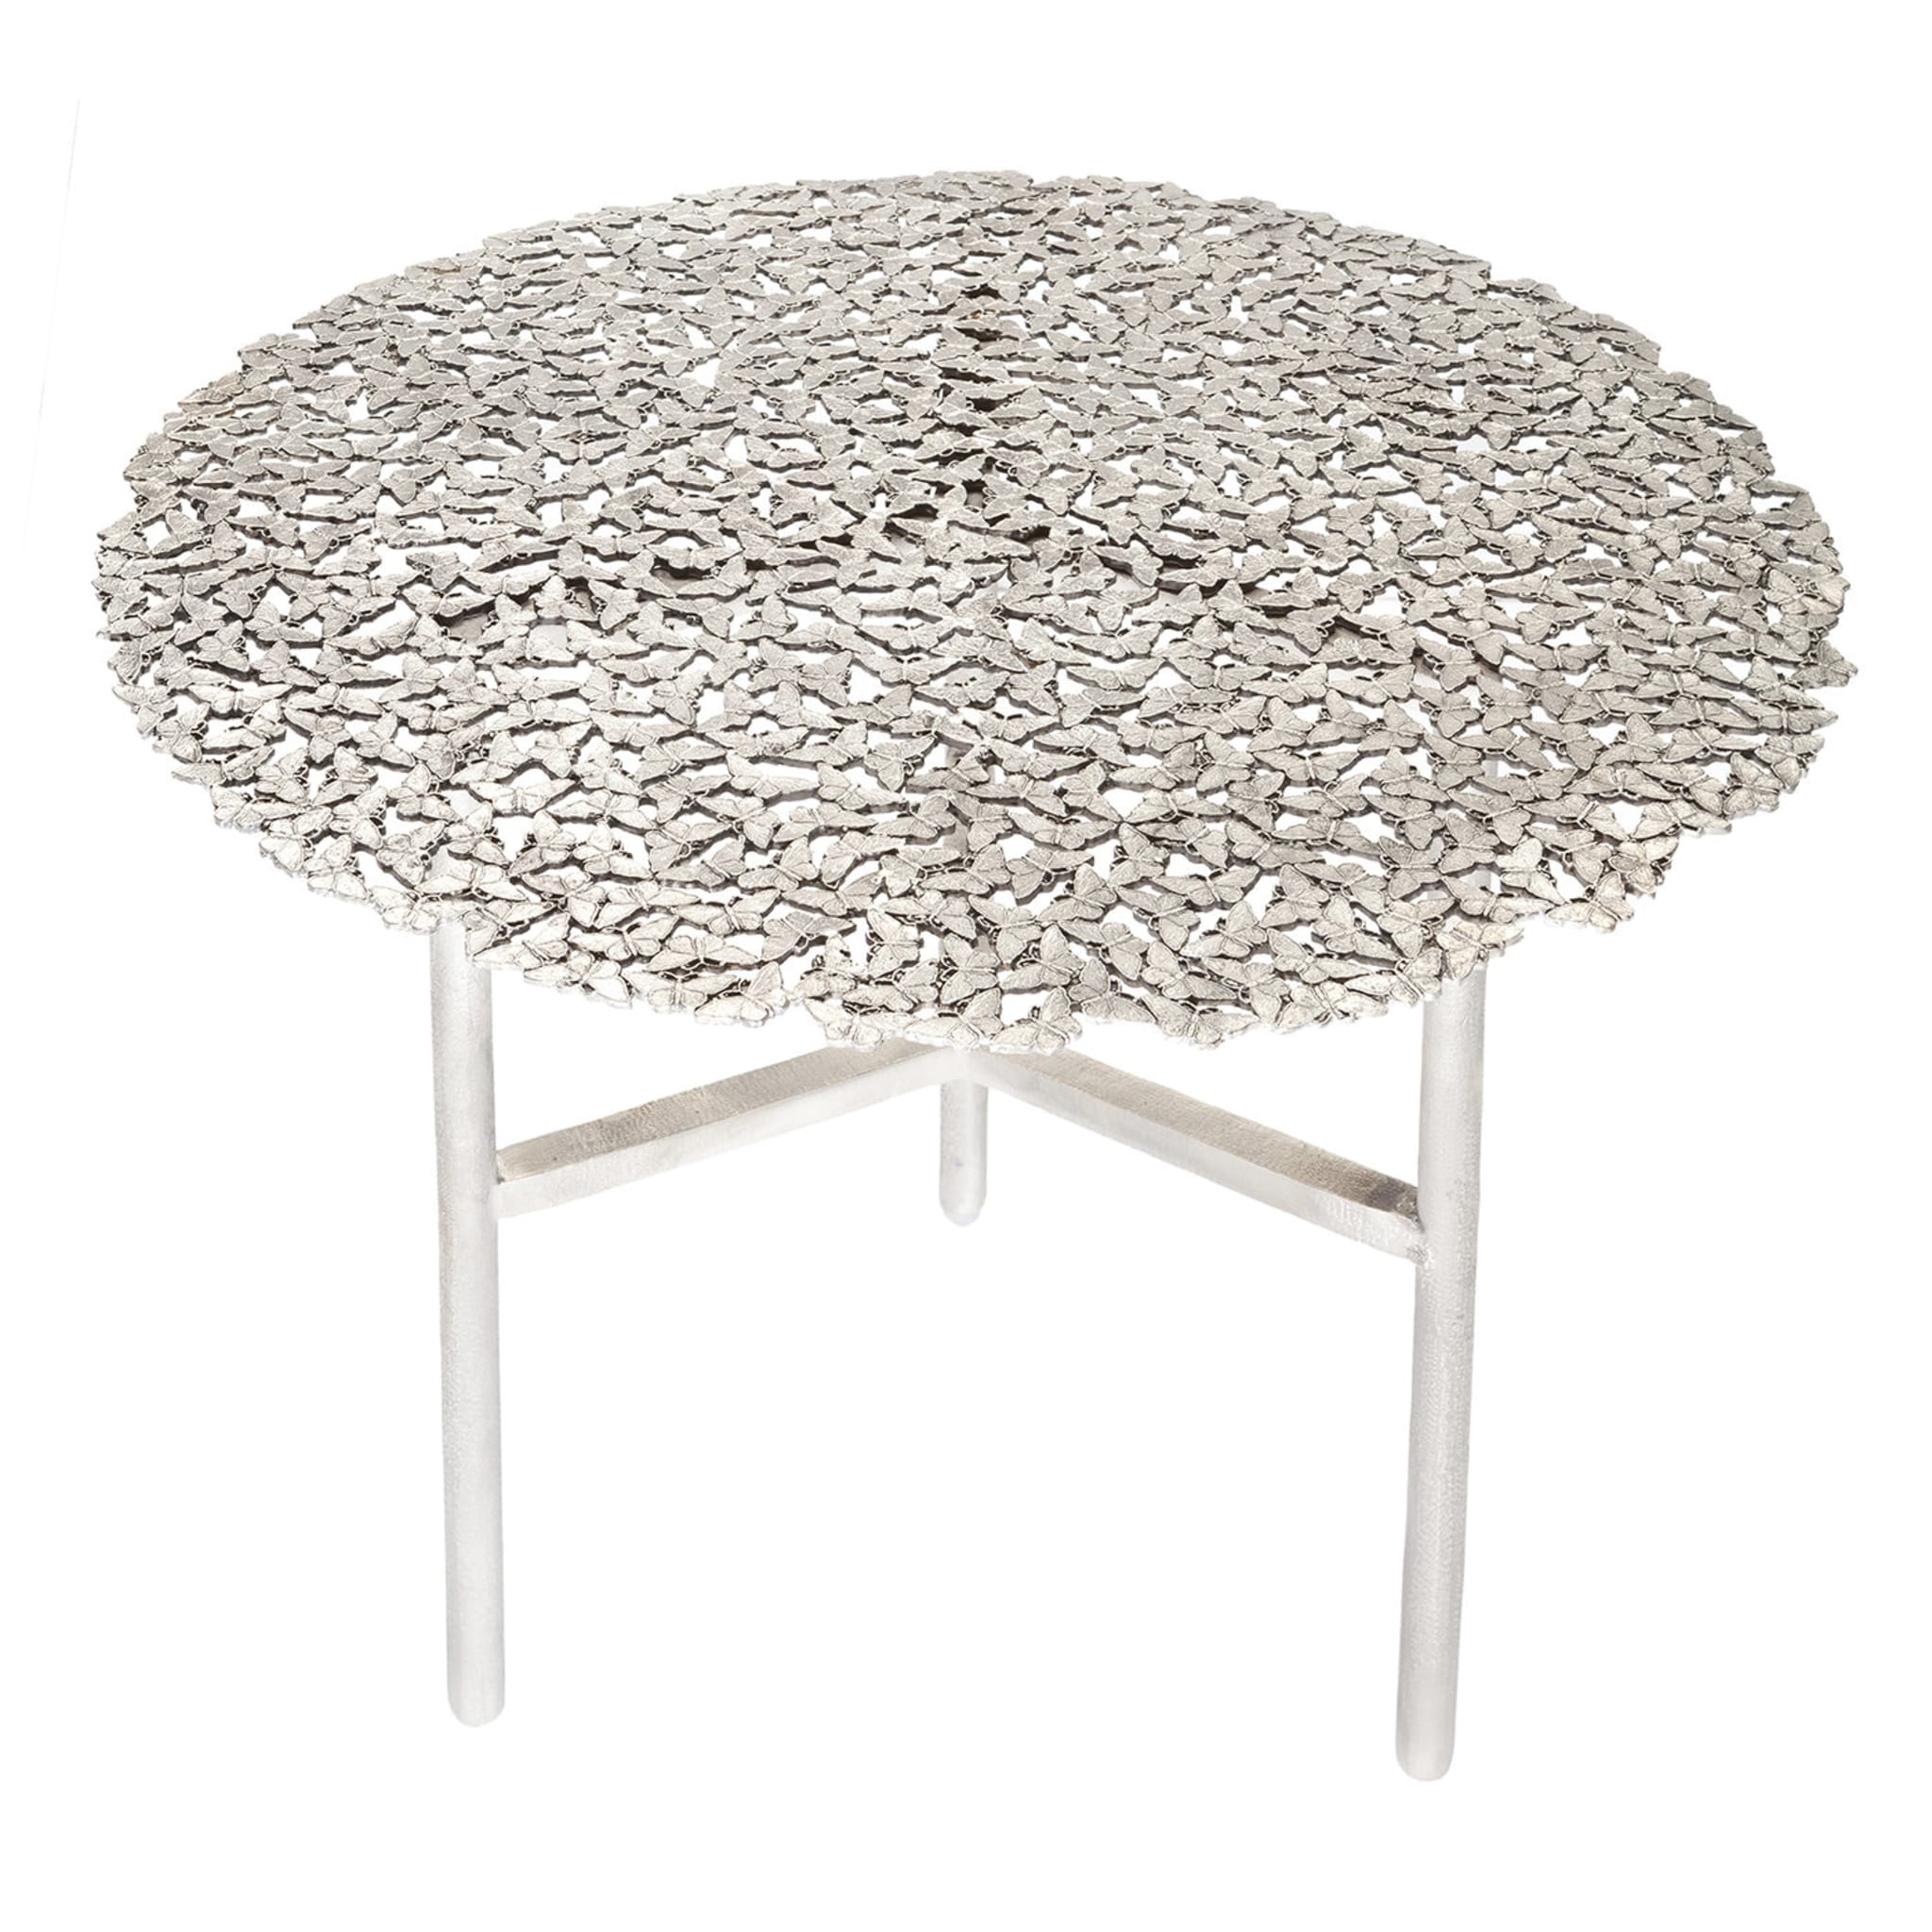 Jean Side Table in White - Alternative view 1